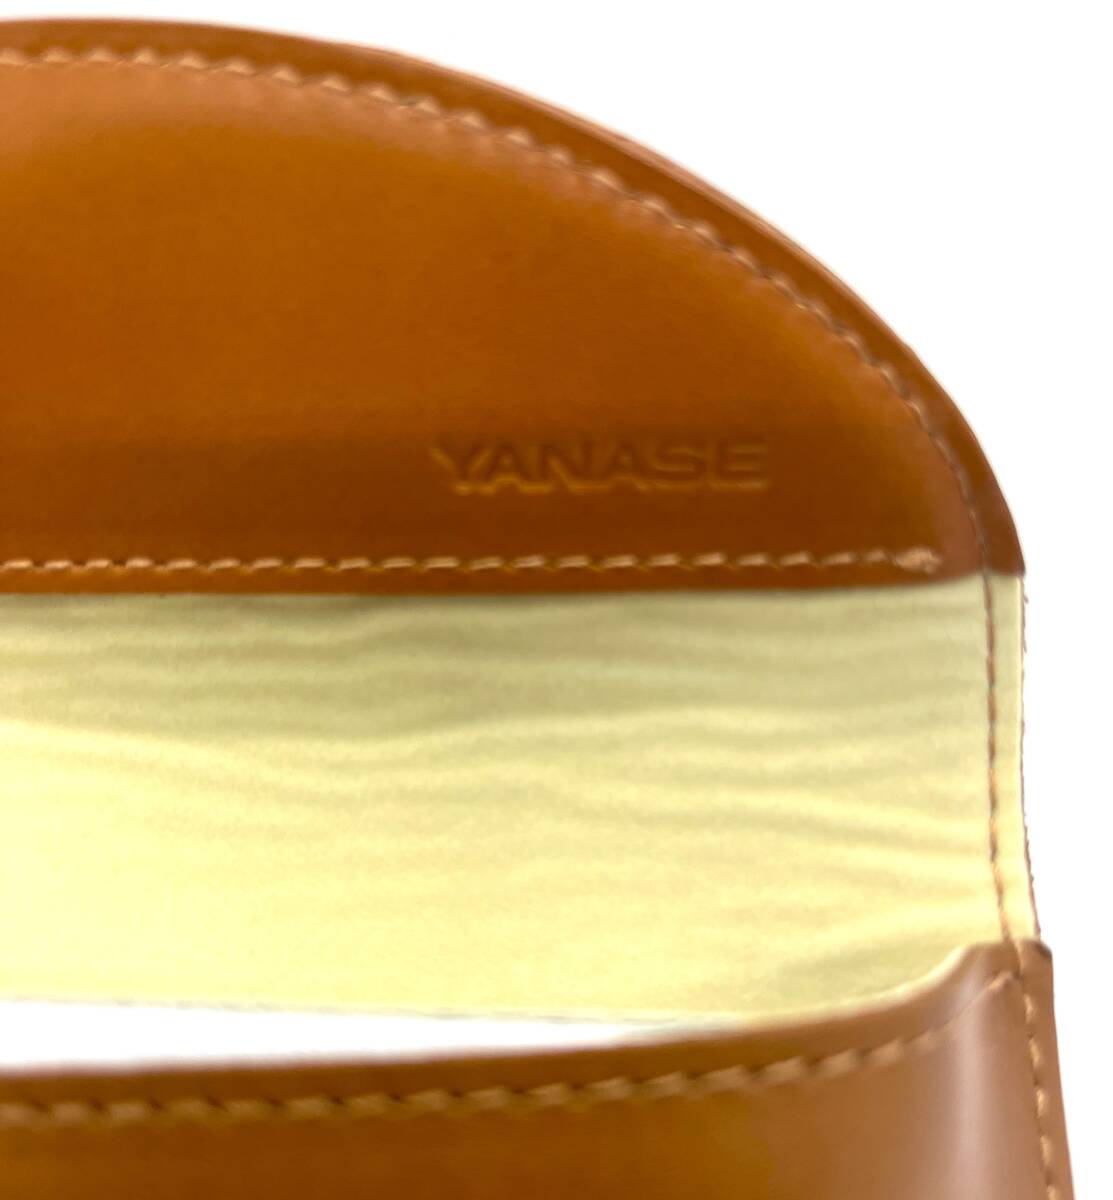  unused * not for sale YANASE "Yanase" SOMESso female saddle made glasses case original leather Brown box attaching /3107